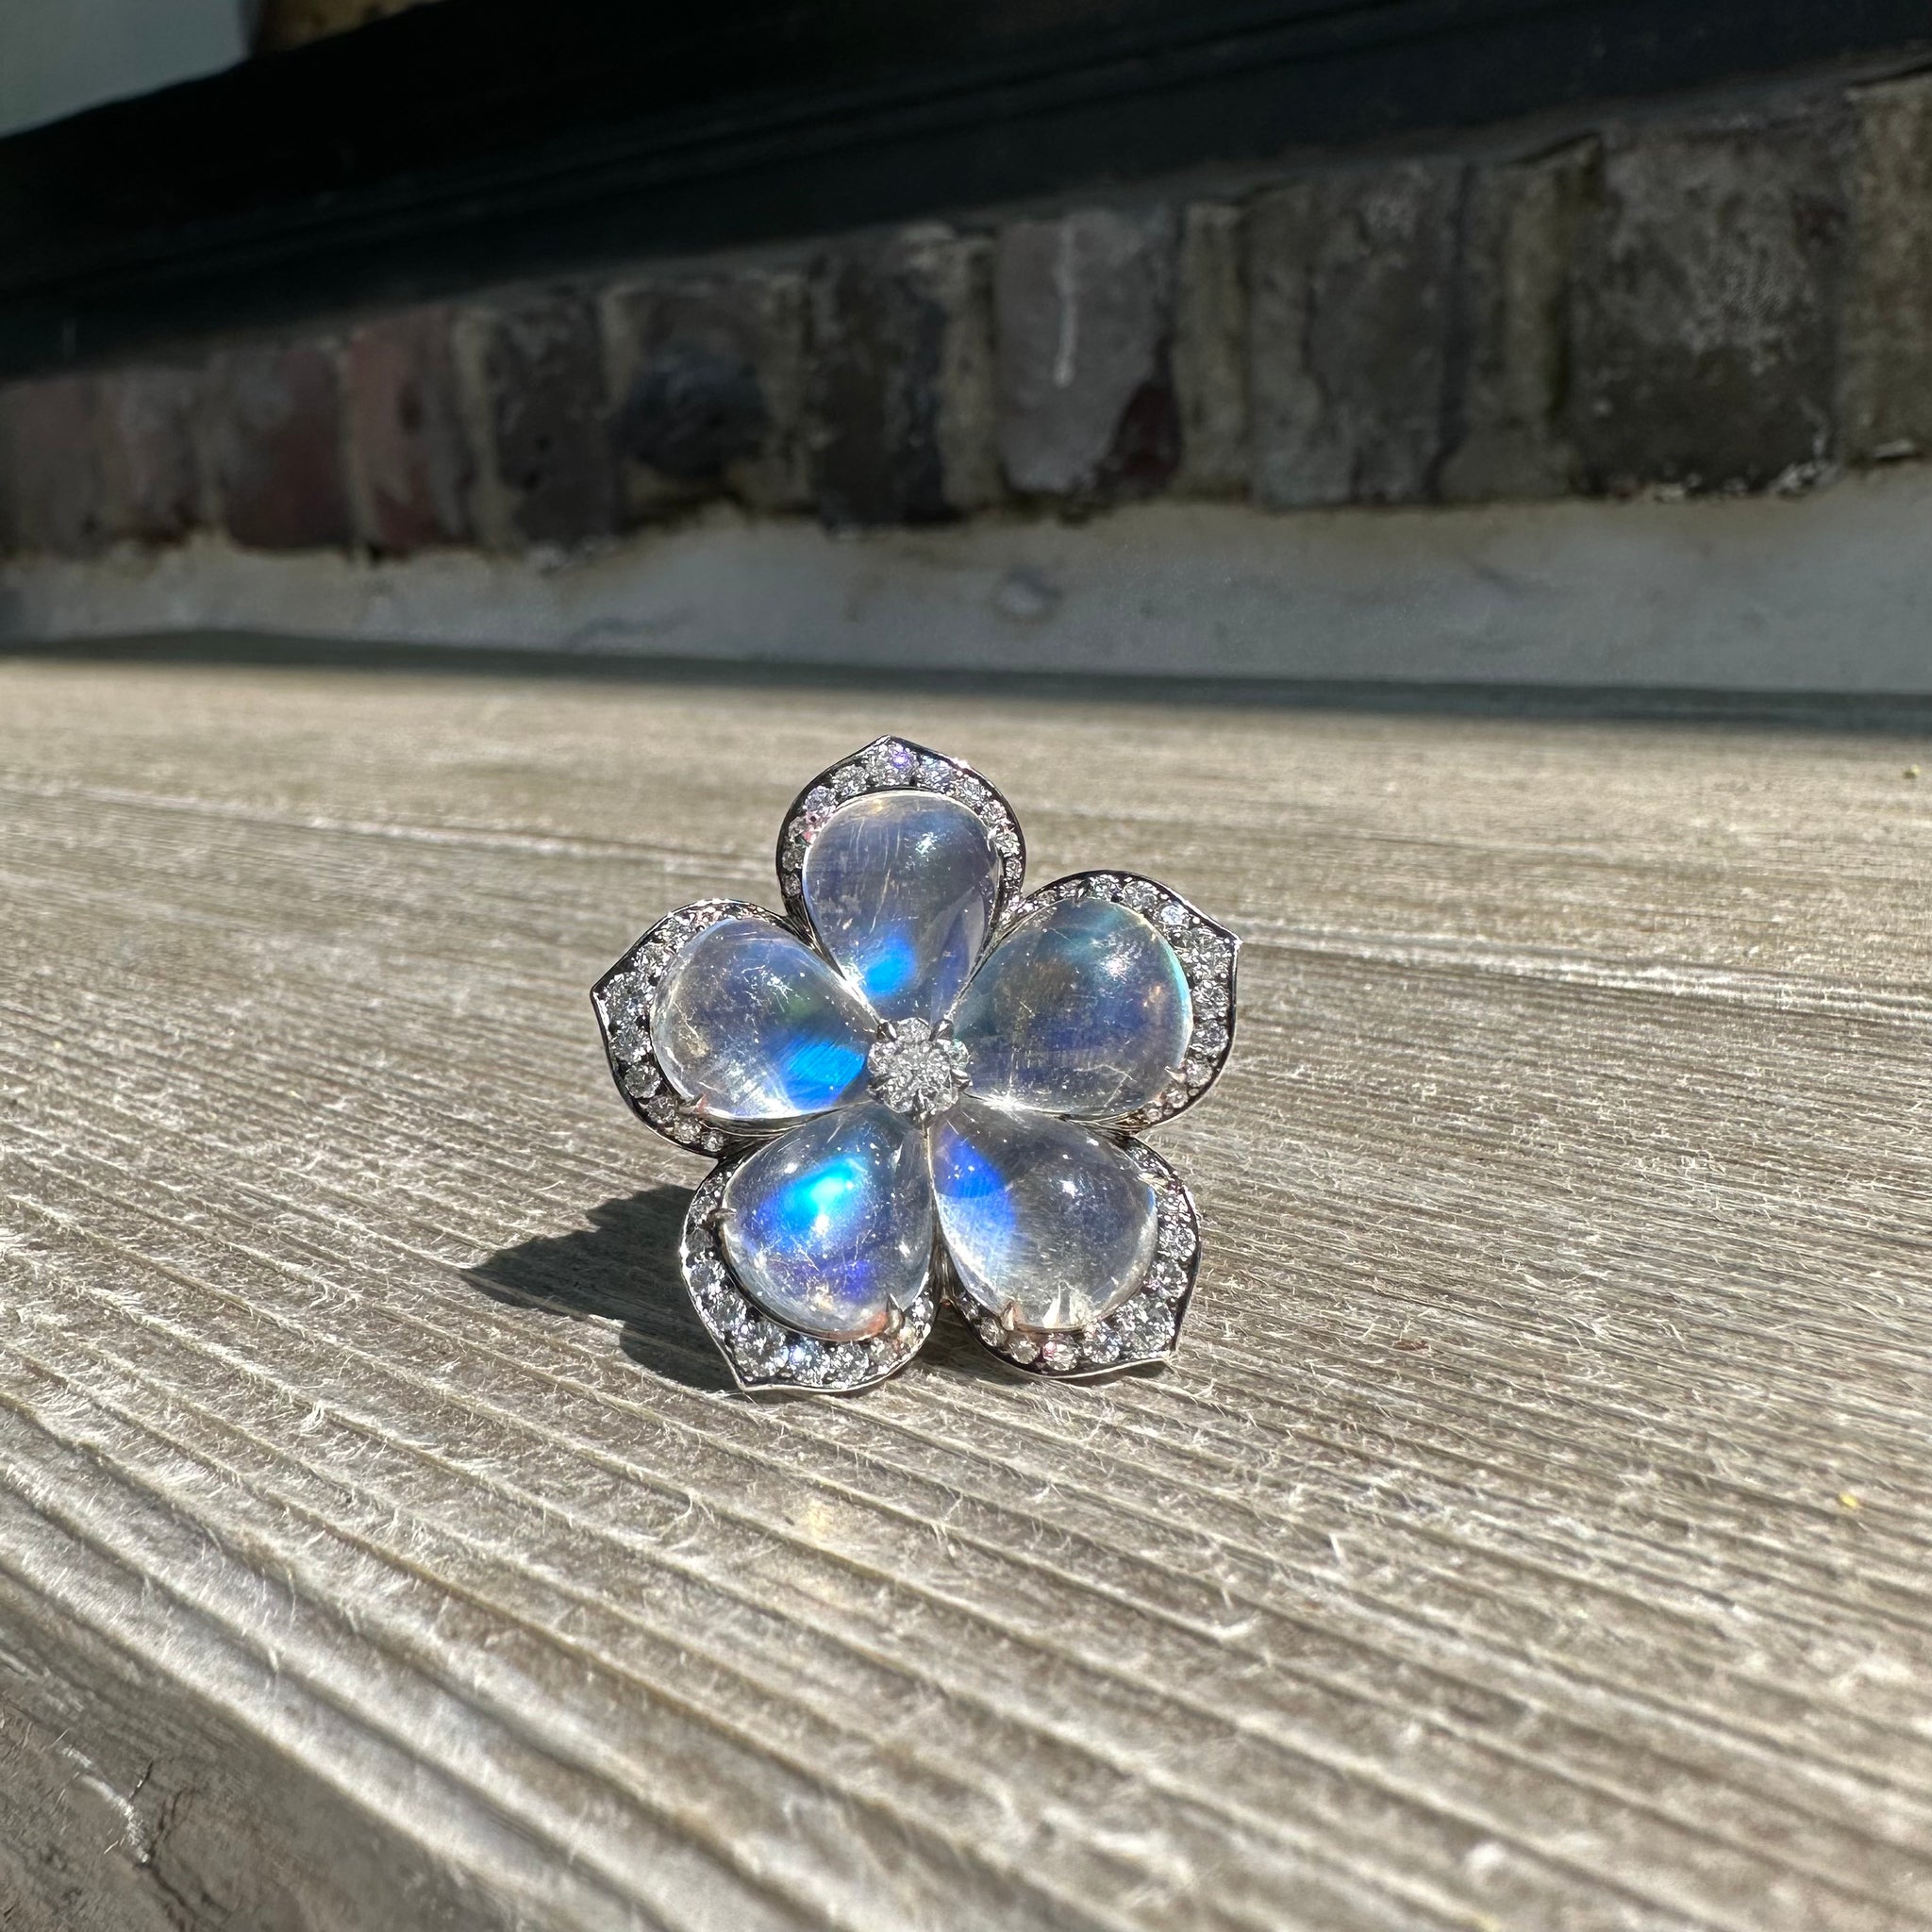 Vintage Flower Ring with Diamonds